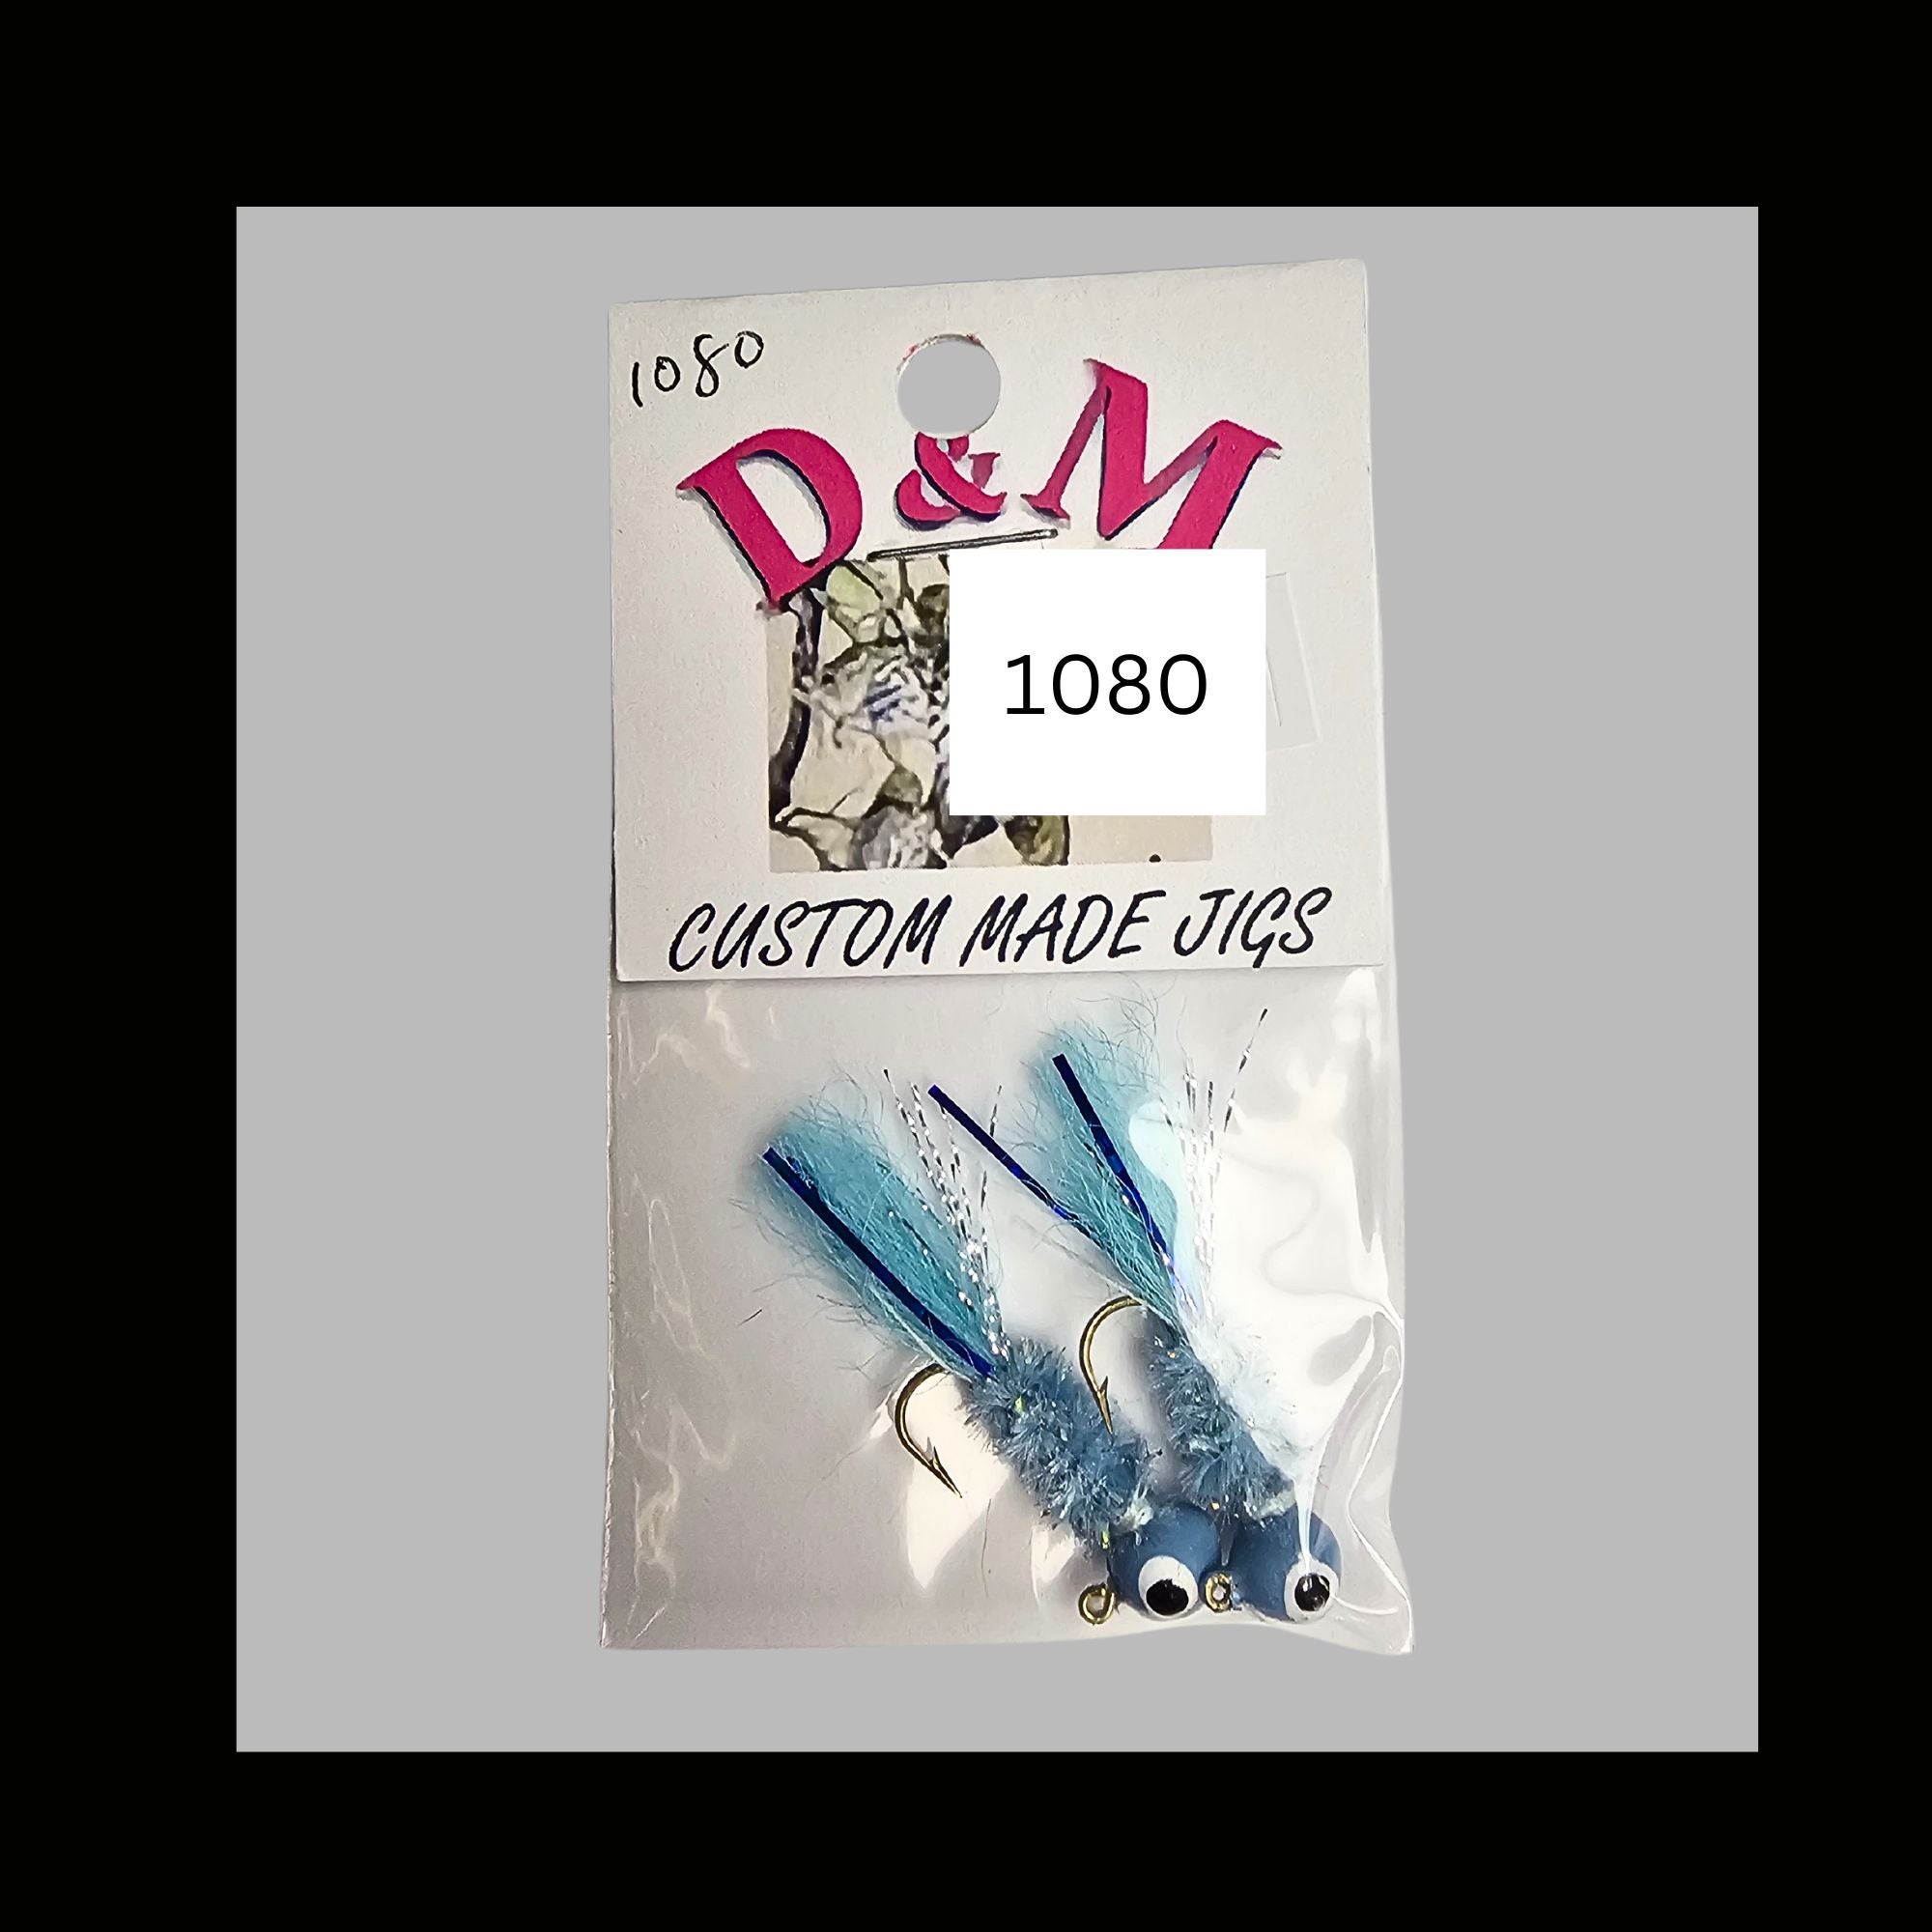 D&M Custom Jigs - I have been hearing about these micro